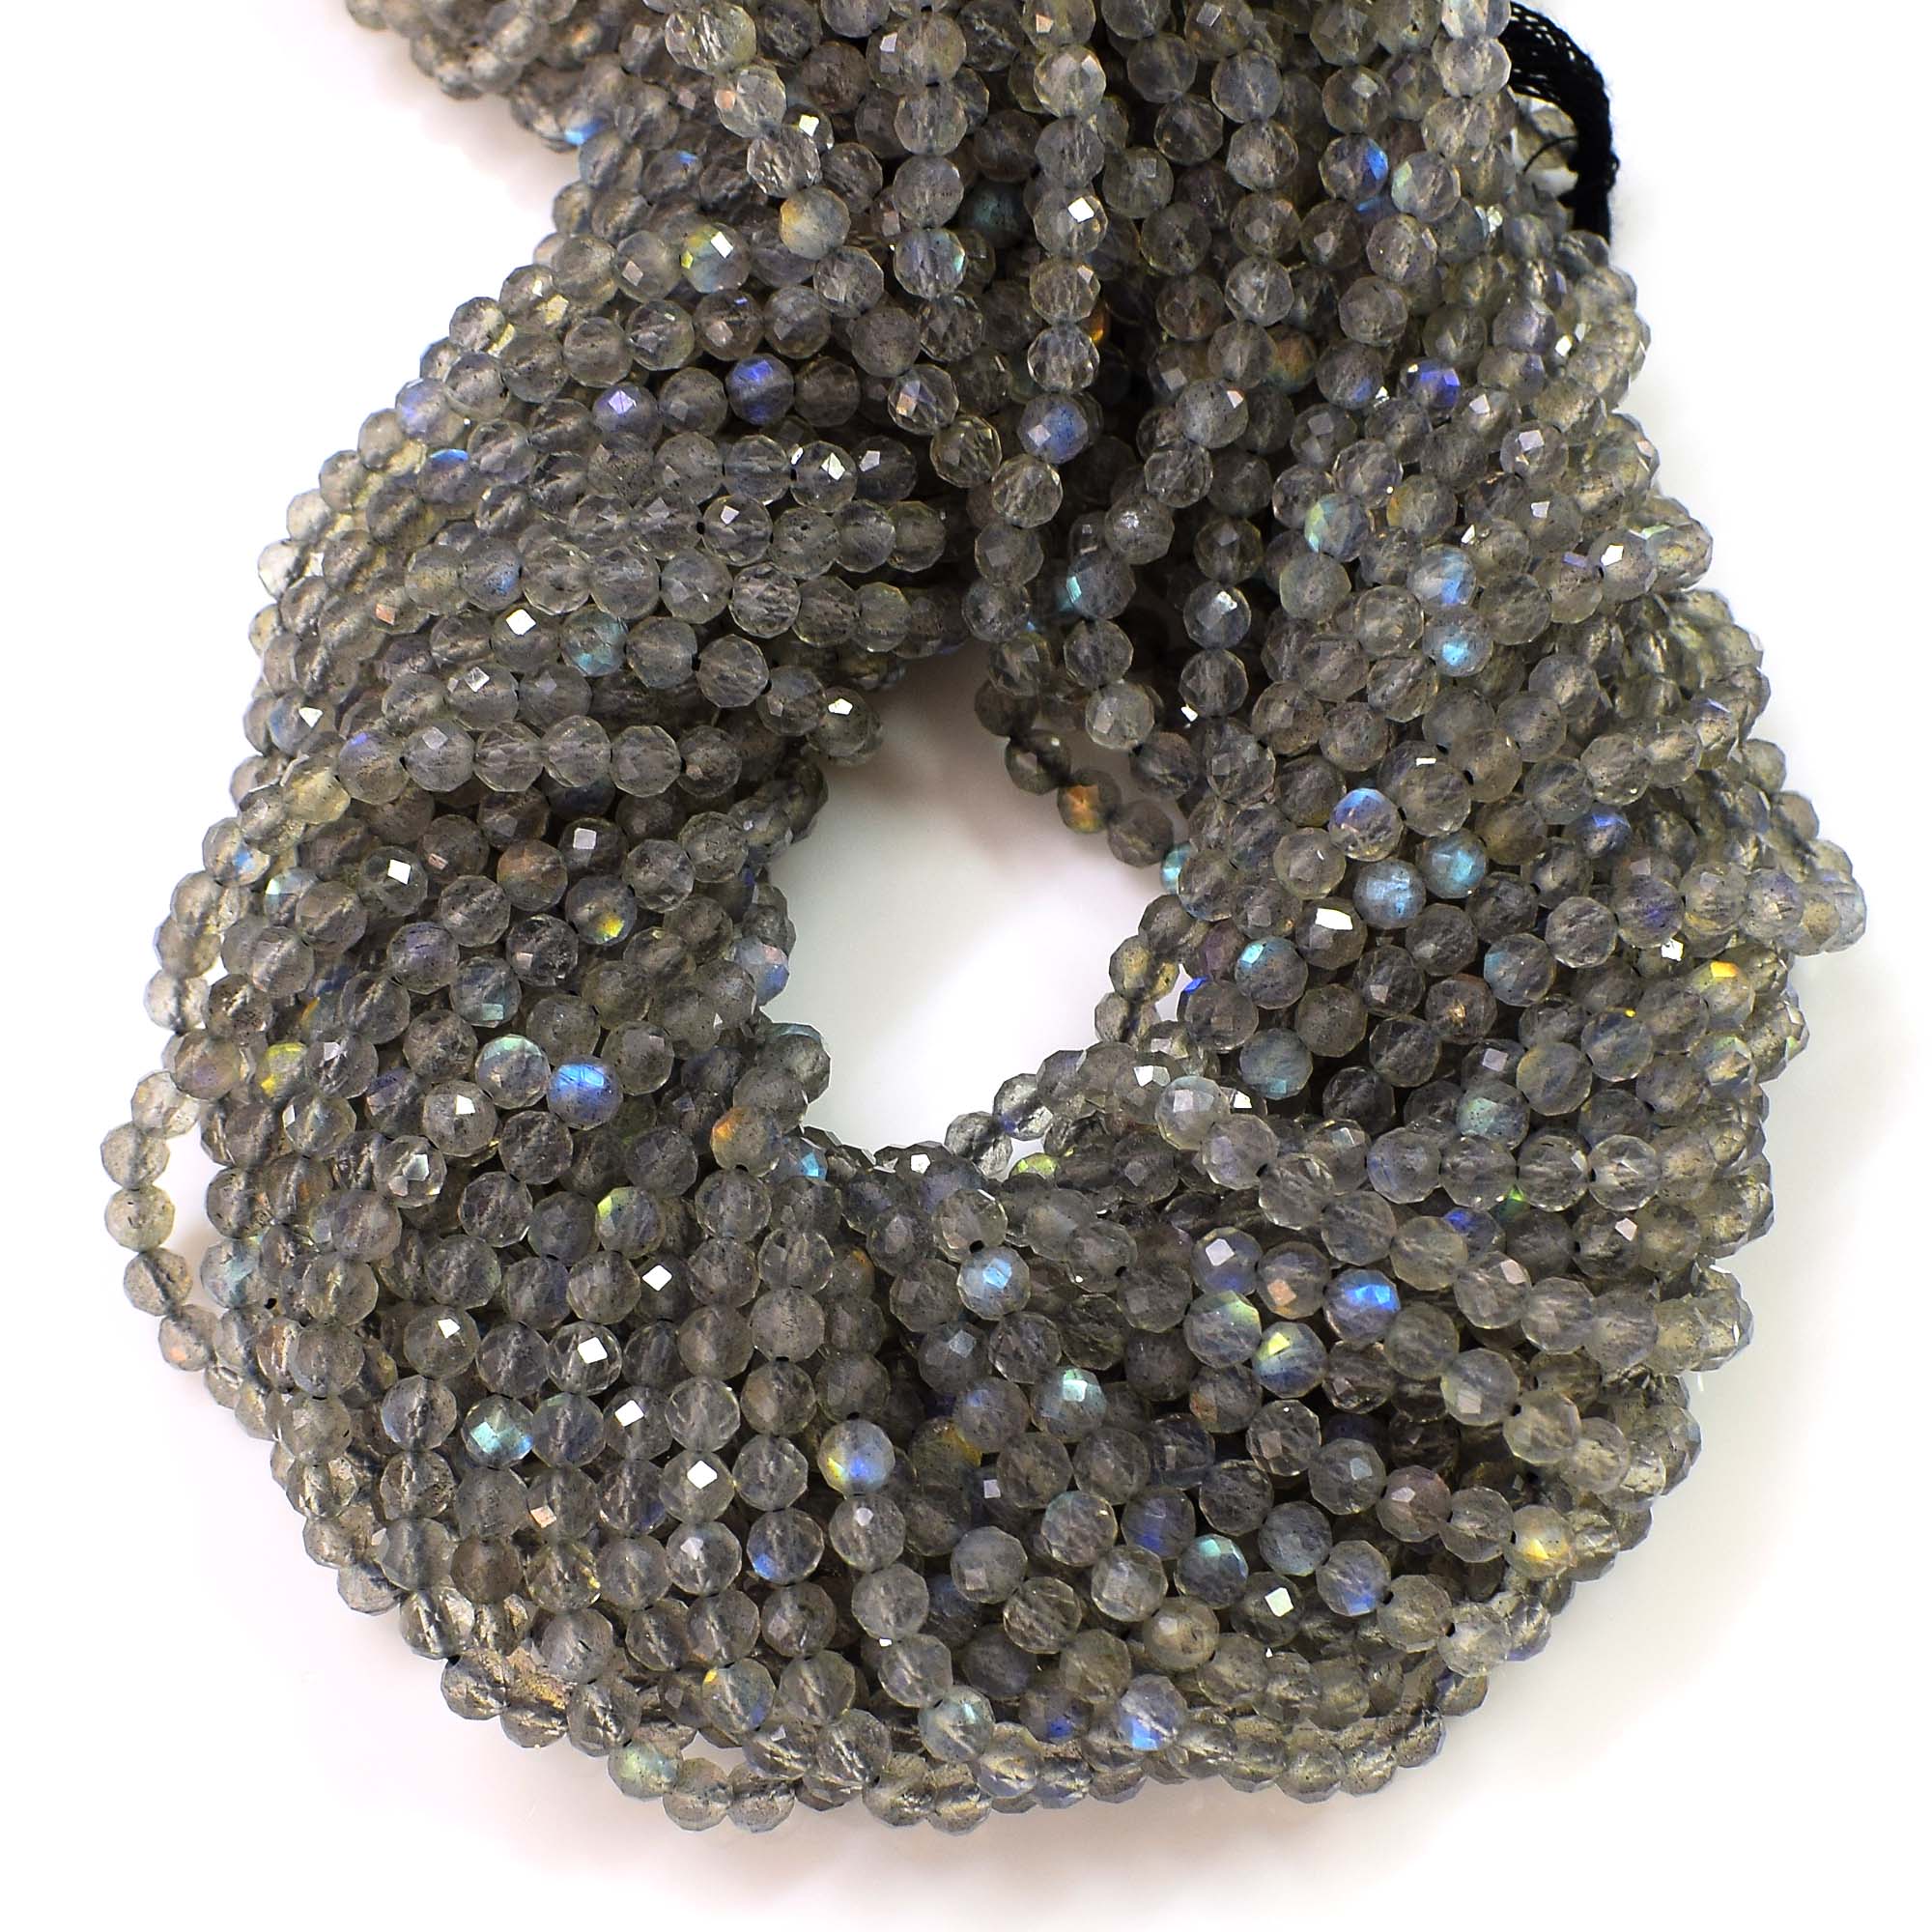 Natural AAA Grade Labradorite Beads / 3-4mm Faceted Grey Labradorite / Round Shape Labradorite Beads